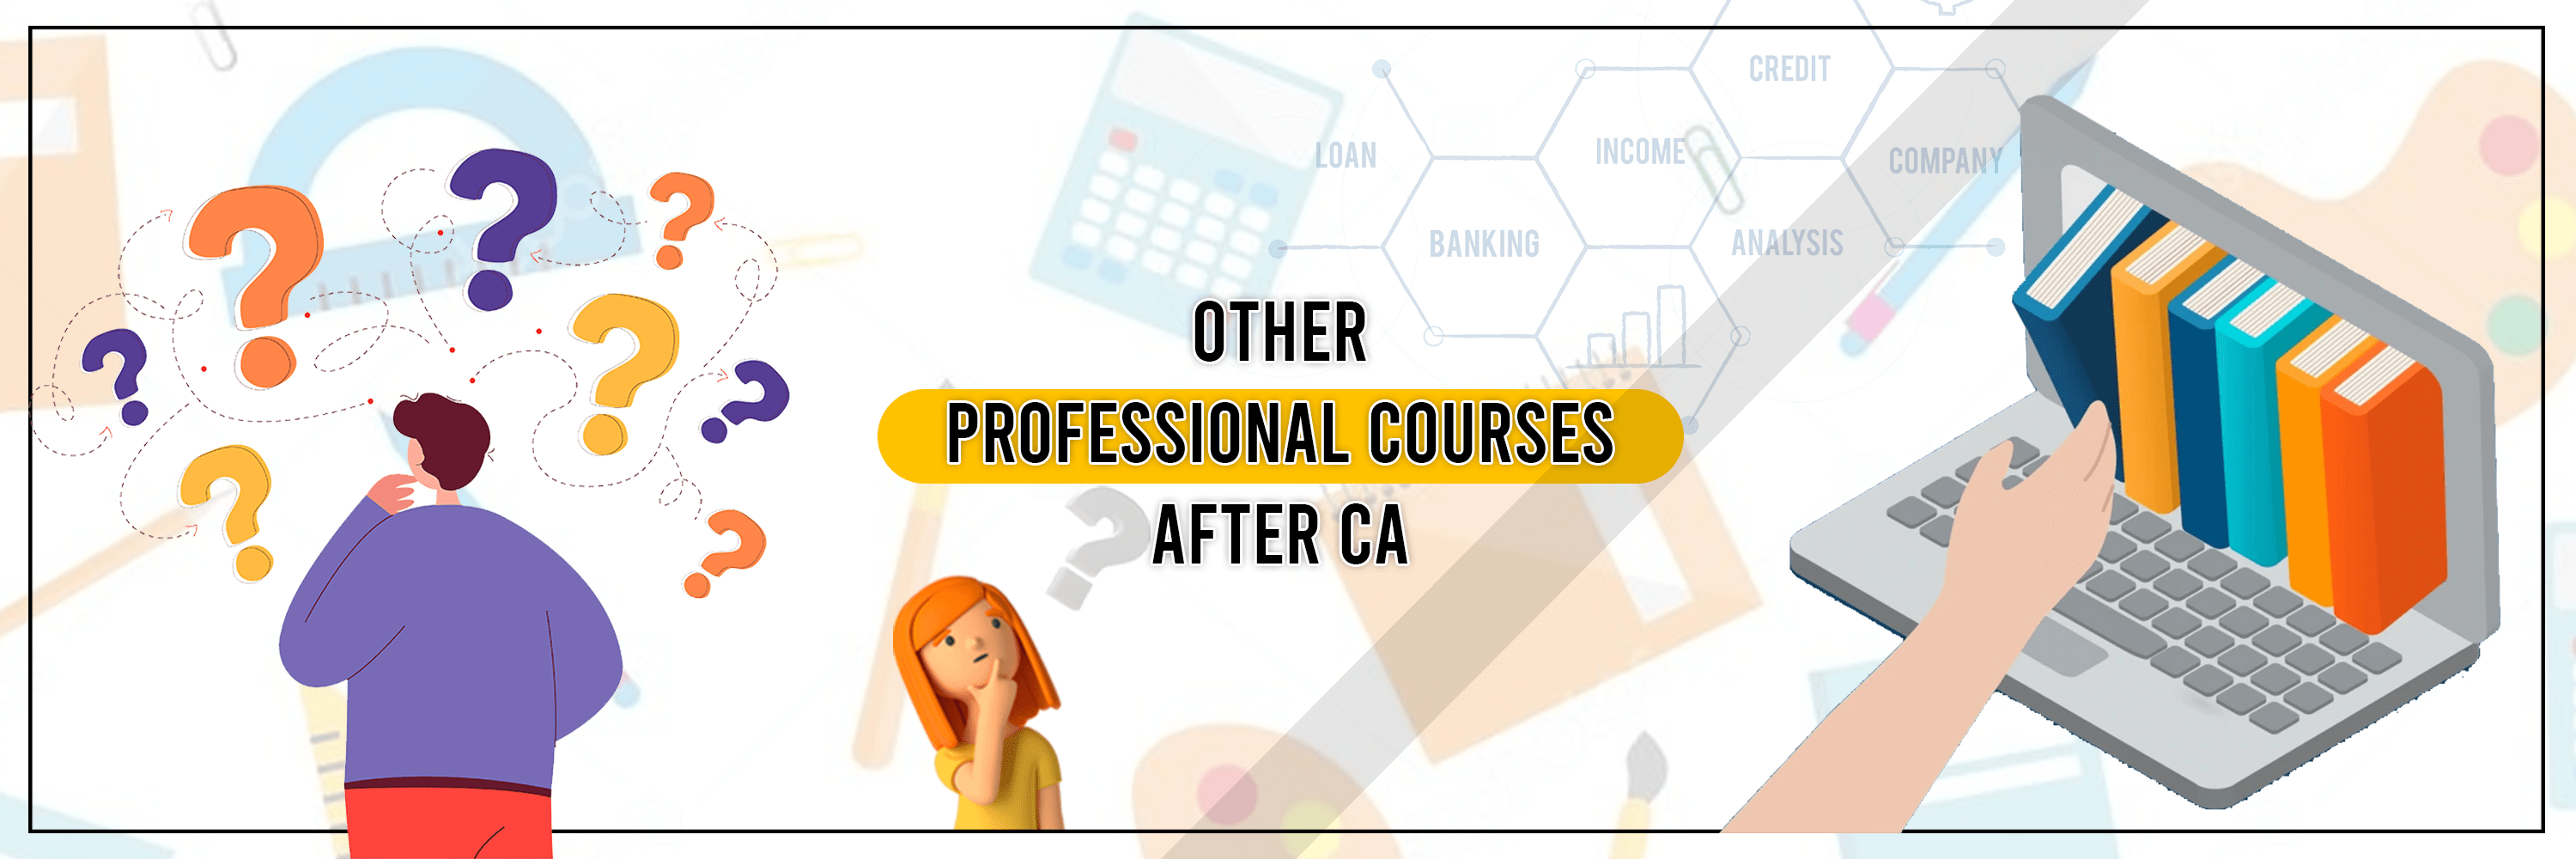 Other Professional Courses after CA